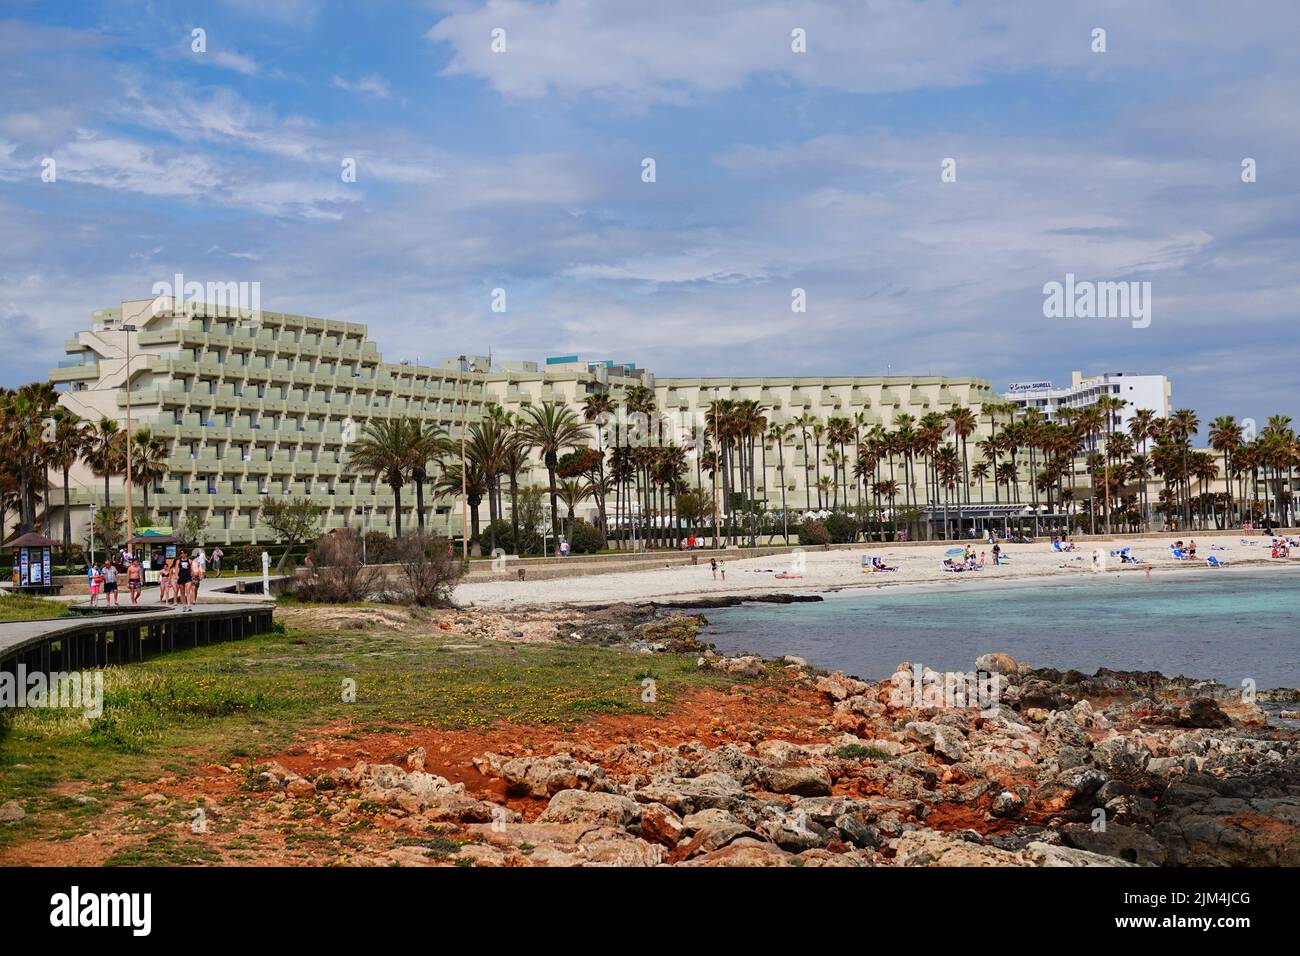 Picture shows a selective iew of the sandy beach of Sa Coma, Mallorca, with hotels, palm trees, lava rock and jetty Stock Photo